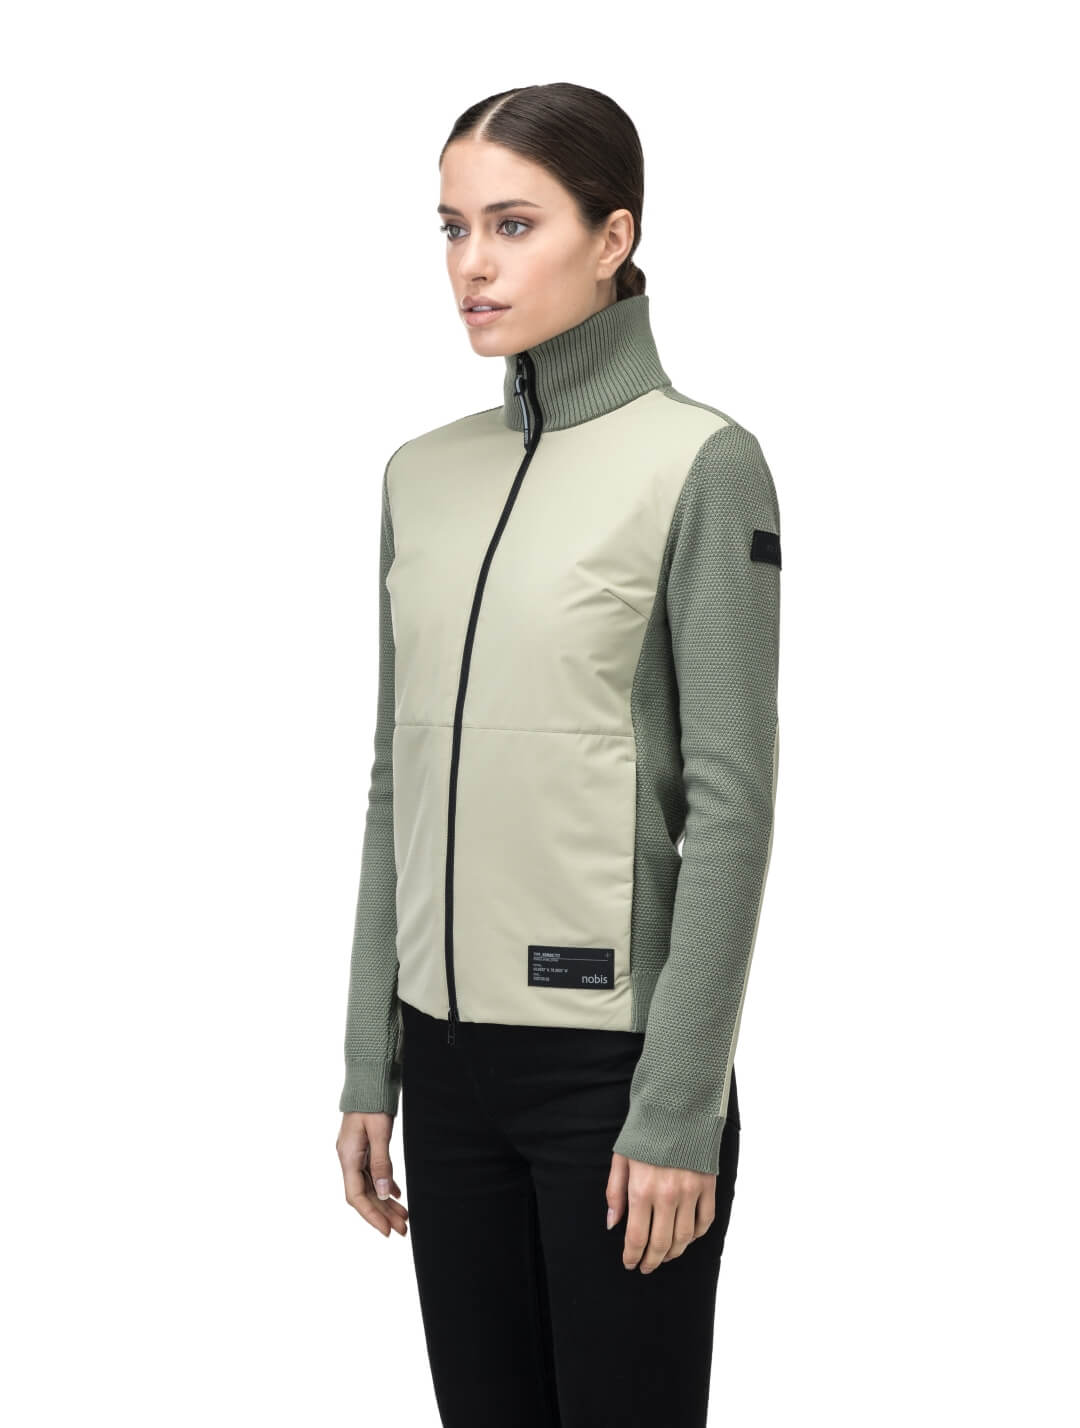 Evo Ladies Performance Full Zip Sweater in hip length, Primaloft Gold Insulation Active+, Merion wool knit collar, sleeves, back, and cuffs, two-way front zipper, and hidden waist pockets, in Clover